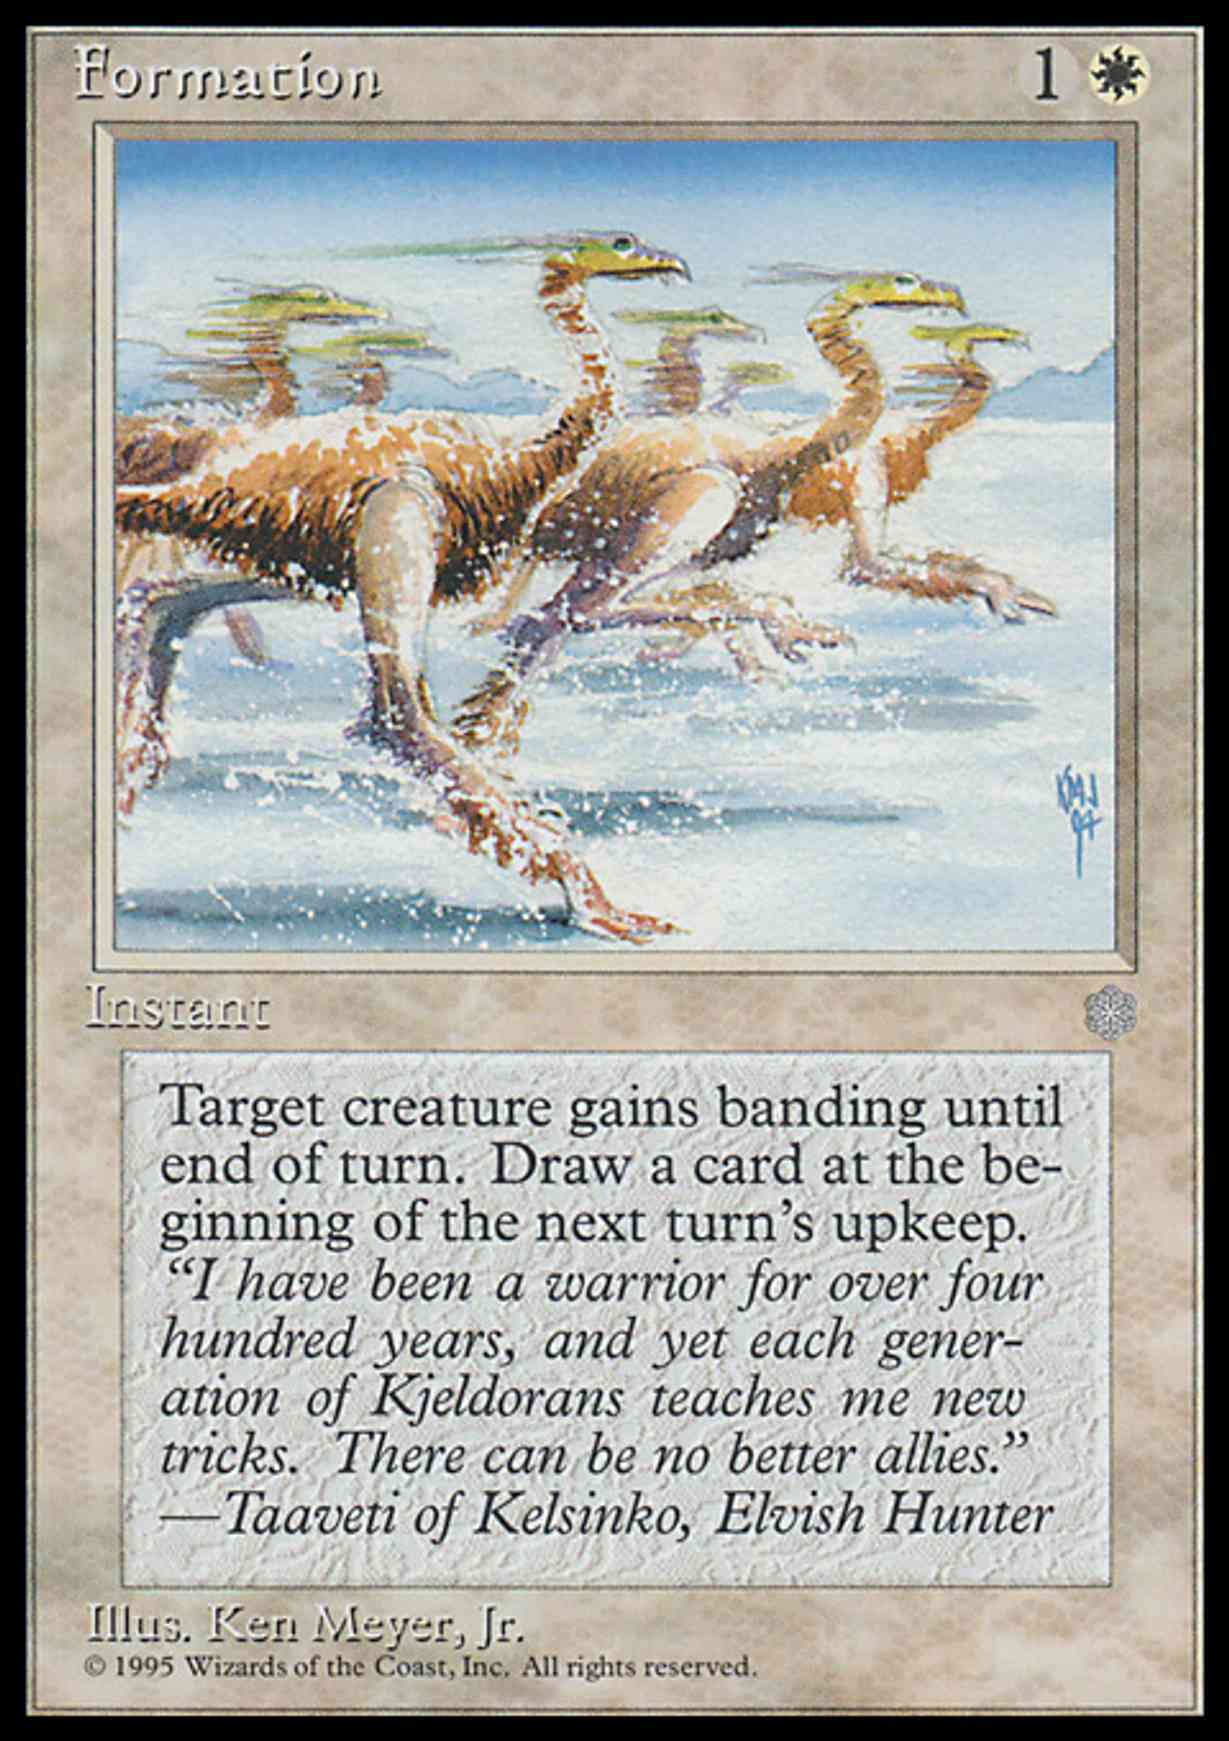 Formation magic card front